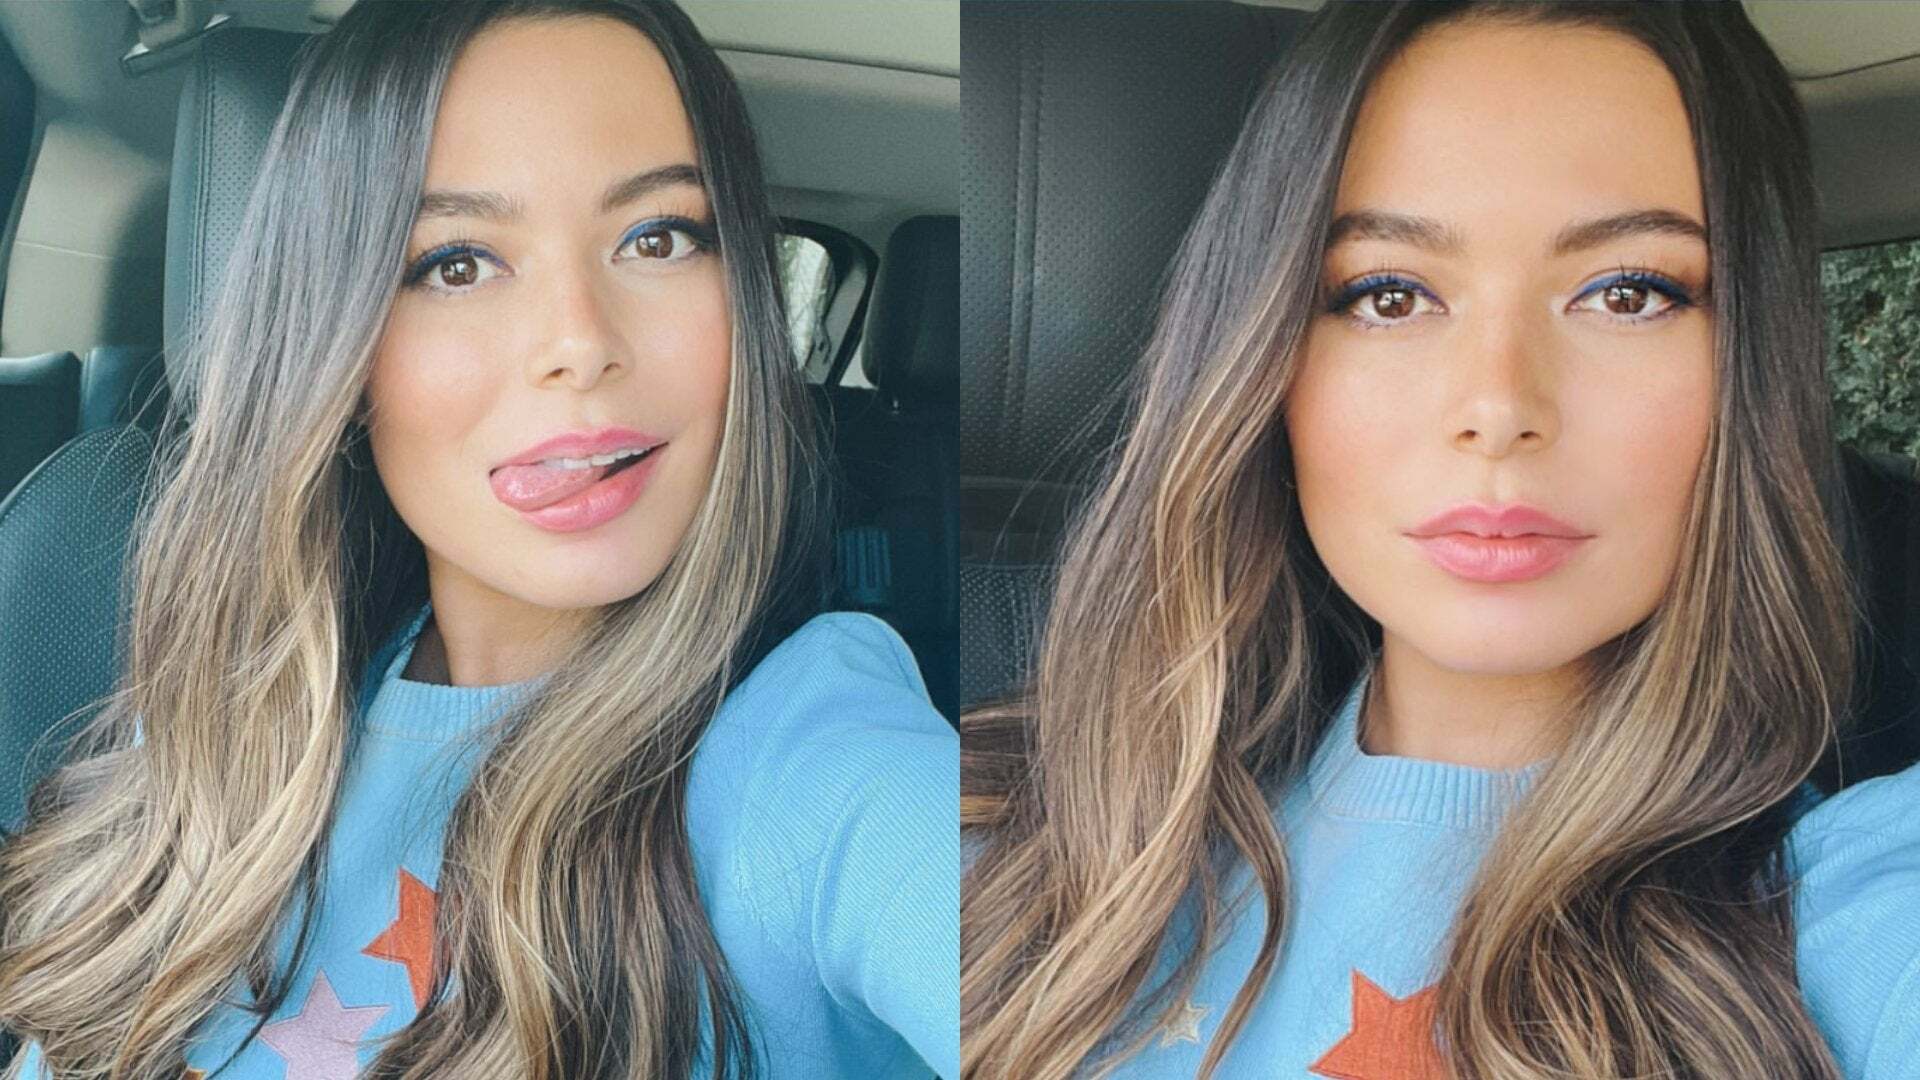 imagine what Miranda Cosgrove's lips and tongue could do with your cock